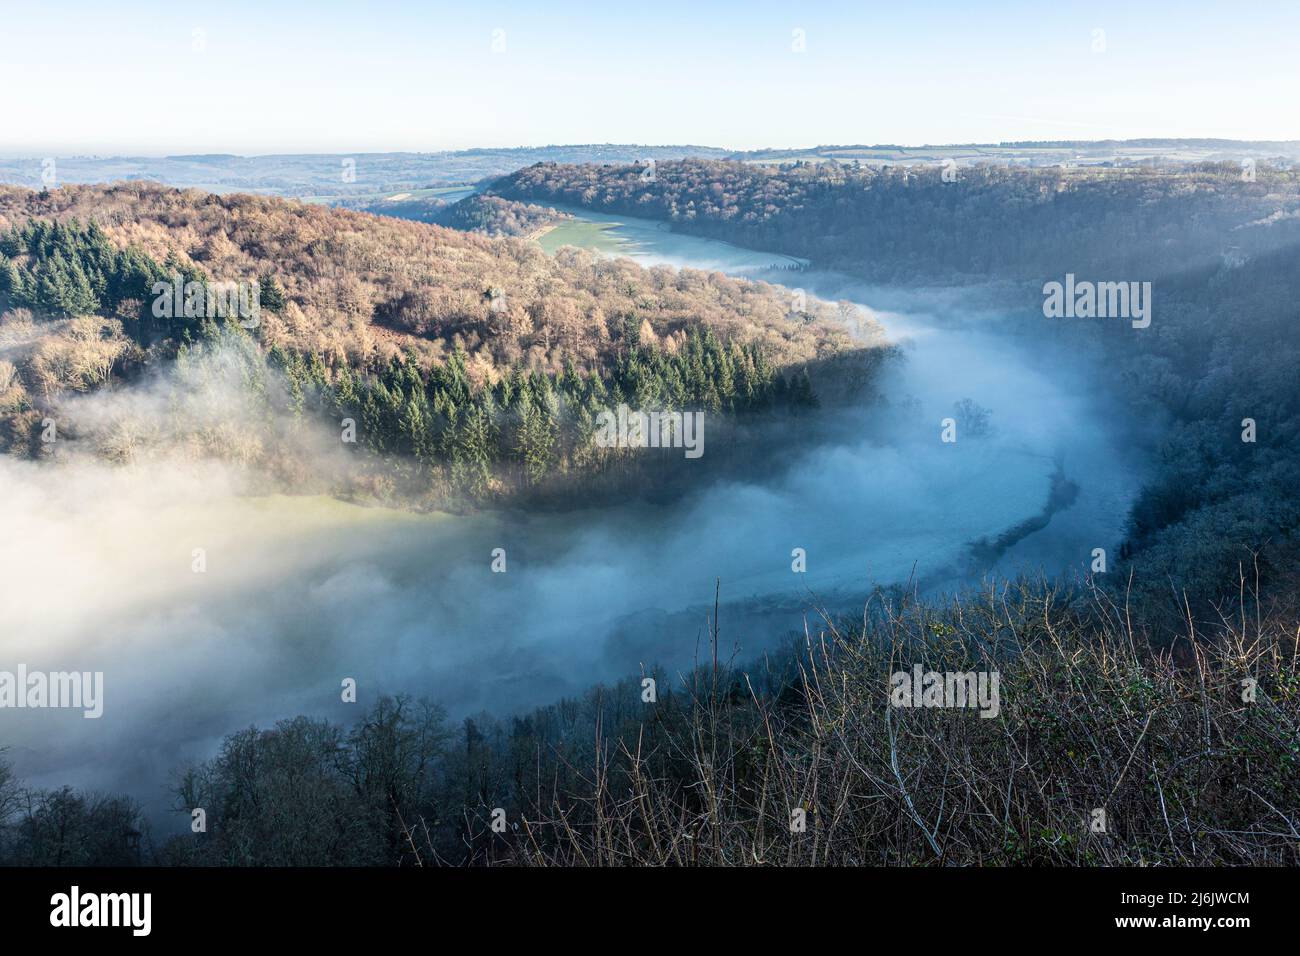 The River Wye obscured by mist due to a temperature inversion, seen from the viewpoint of Symonds Yat Rock, Herefordshire, England UK Stock Photo